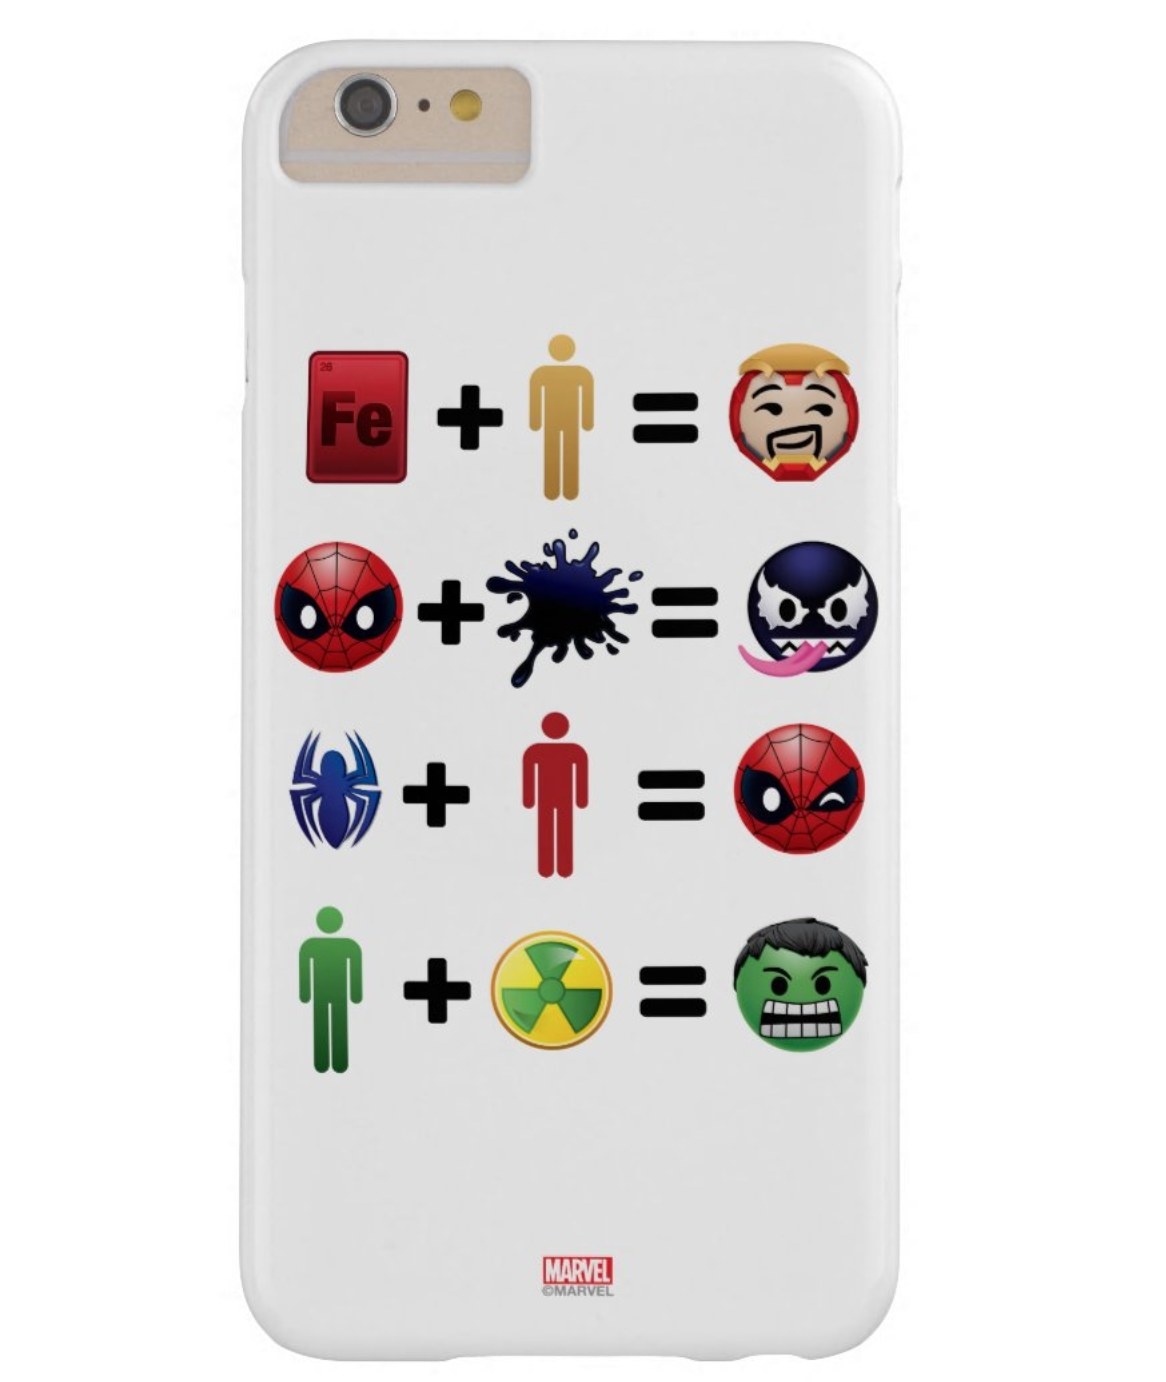 the phone case with different emoji puzzles that each mean a marvel character